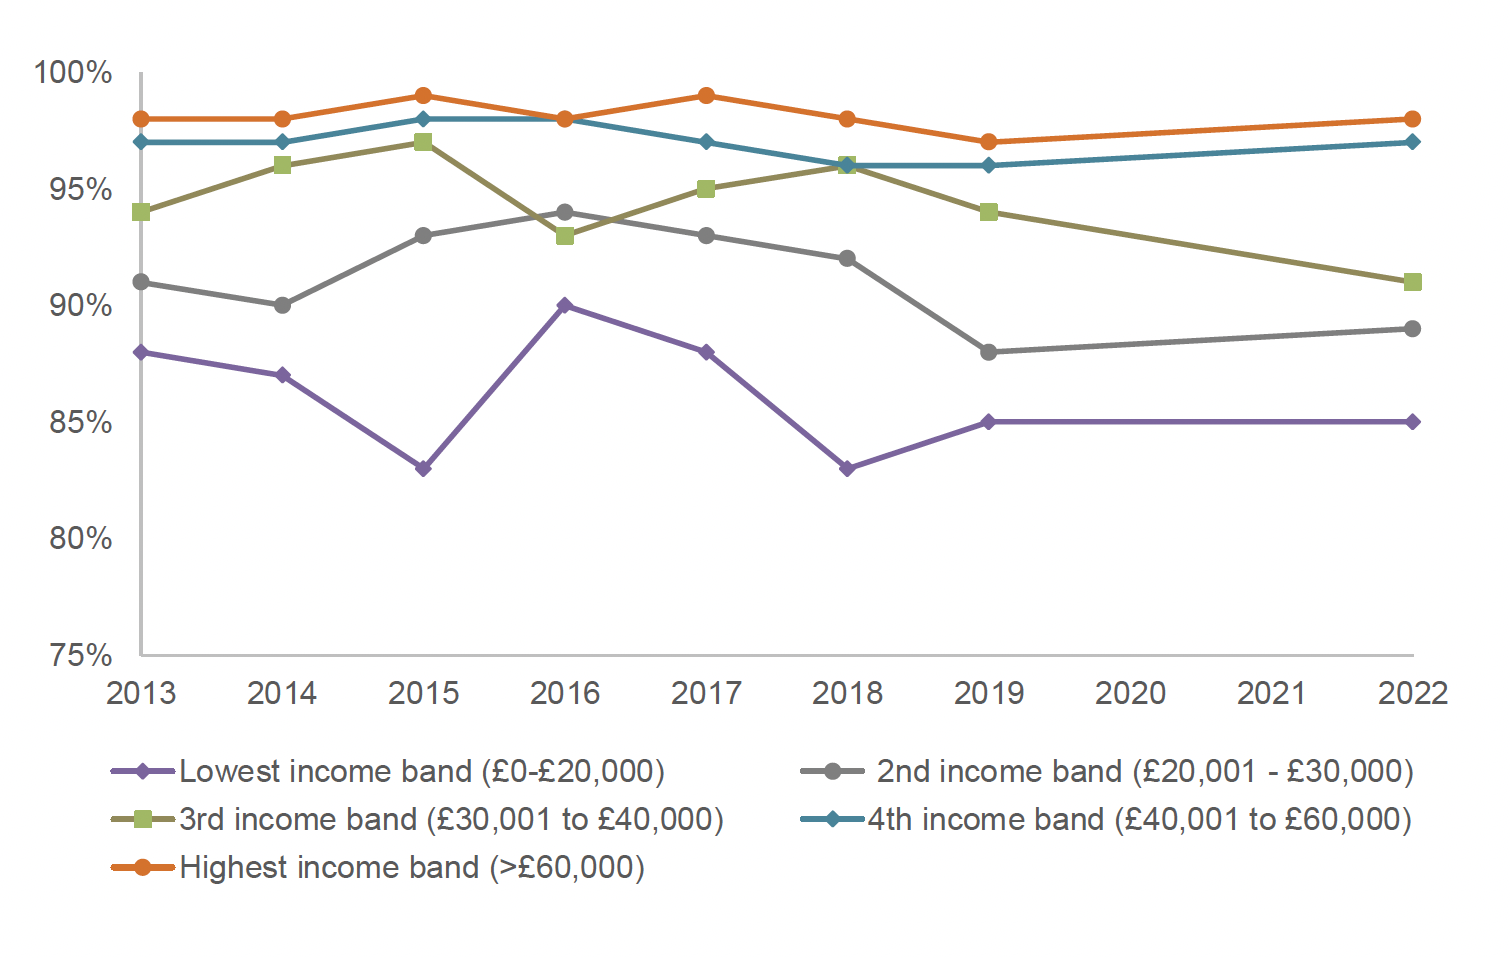 A chart displaying the trend
data (2013-2022) for the neighbourhood rating for all adults living in a
household with children. There are five coloured lines - each line represents
one of the five annual household income bands.